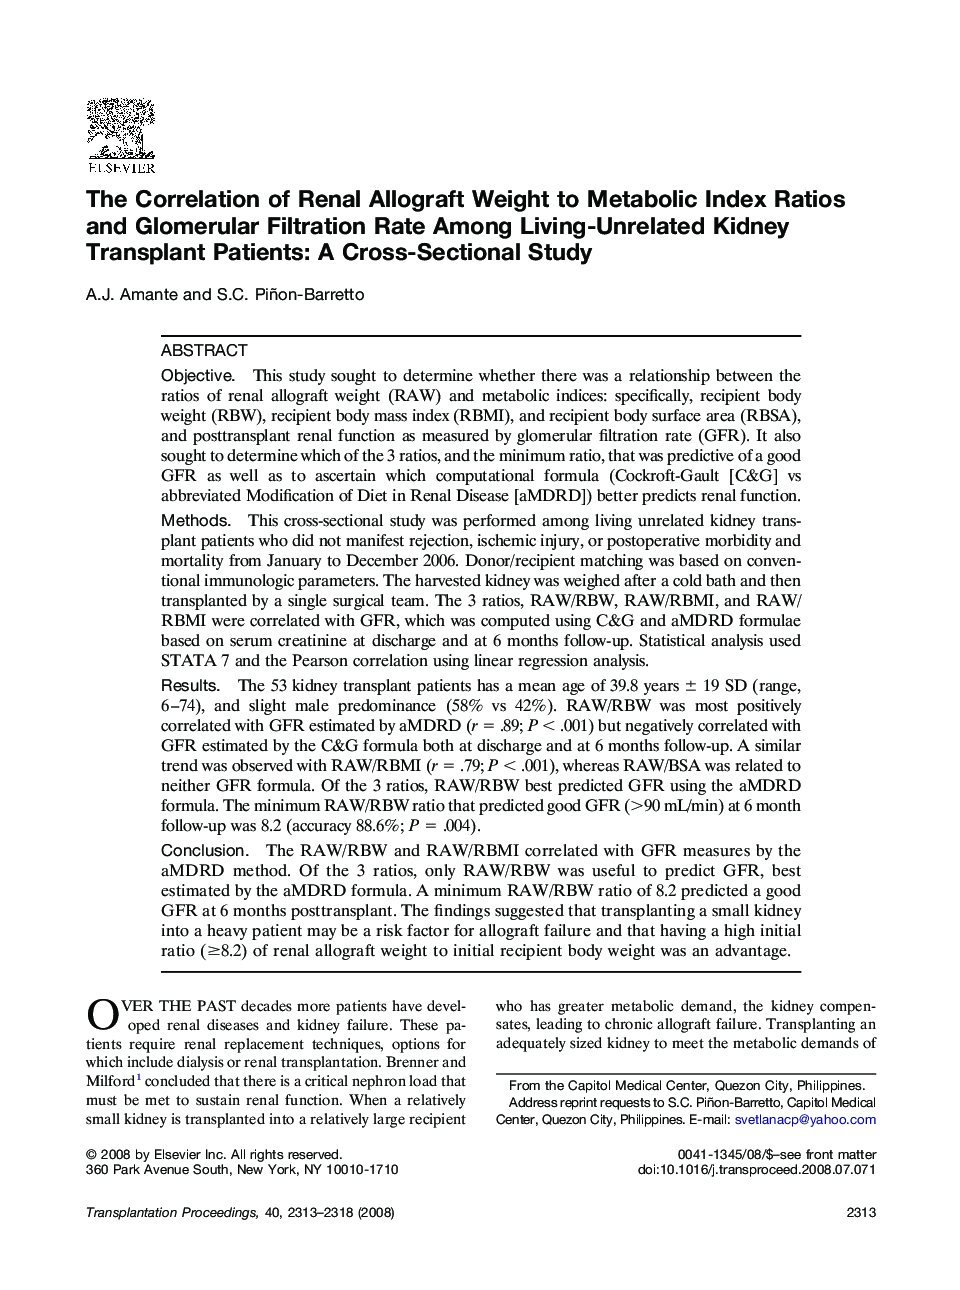 The Correlation of Renal Allograft Weight to Metabolic Index Ratios and Glomerular Filtration Rate Among Living-Unrelated Kidney Transplant Patients: A Cross-Sectional Study